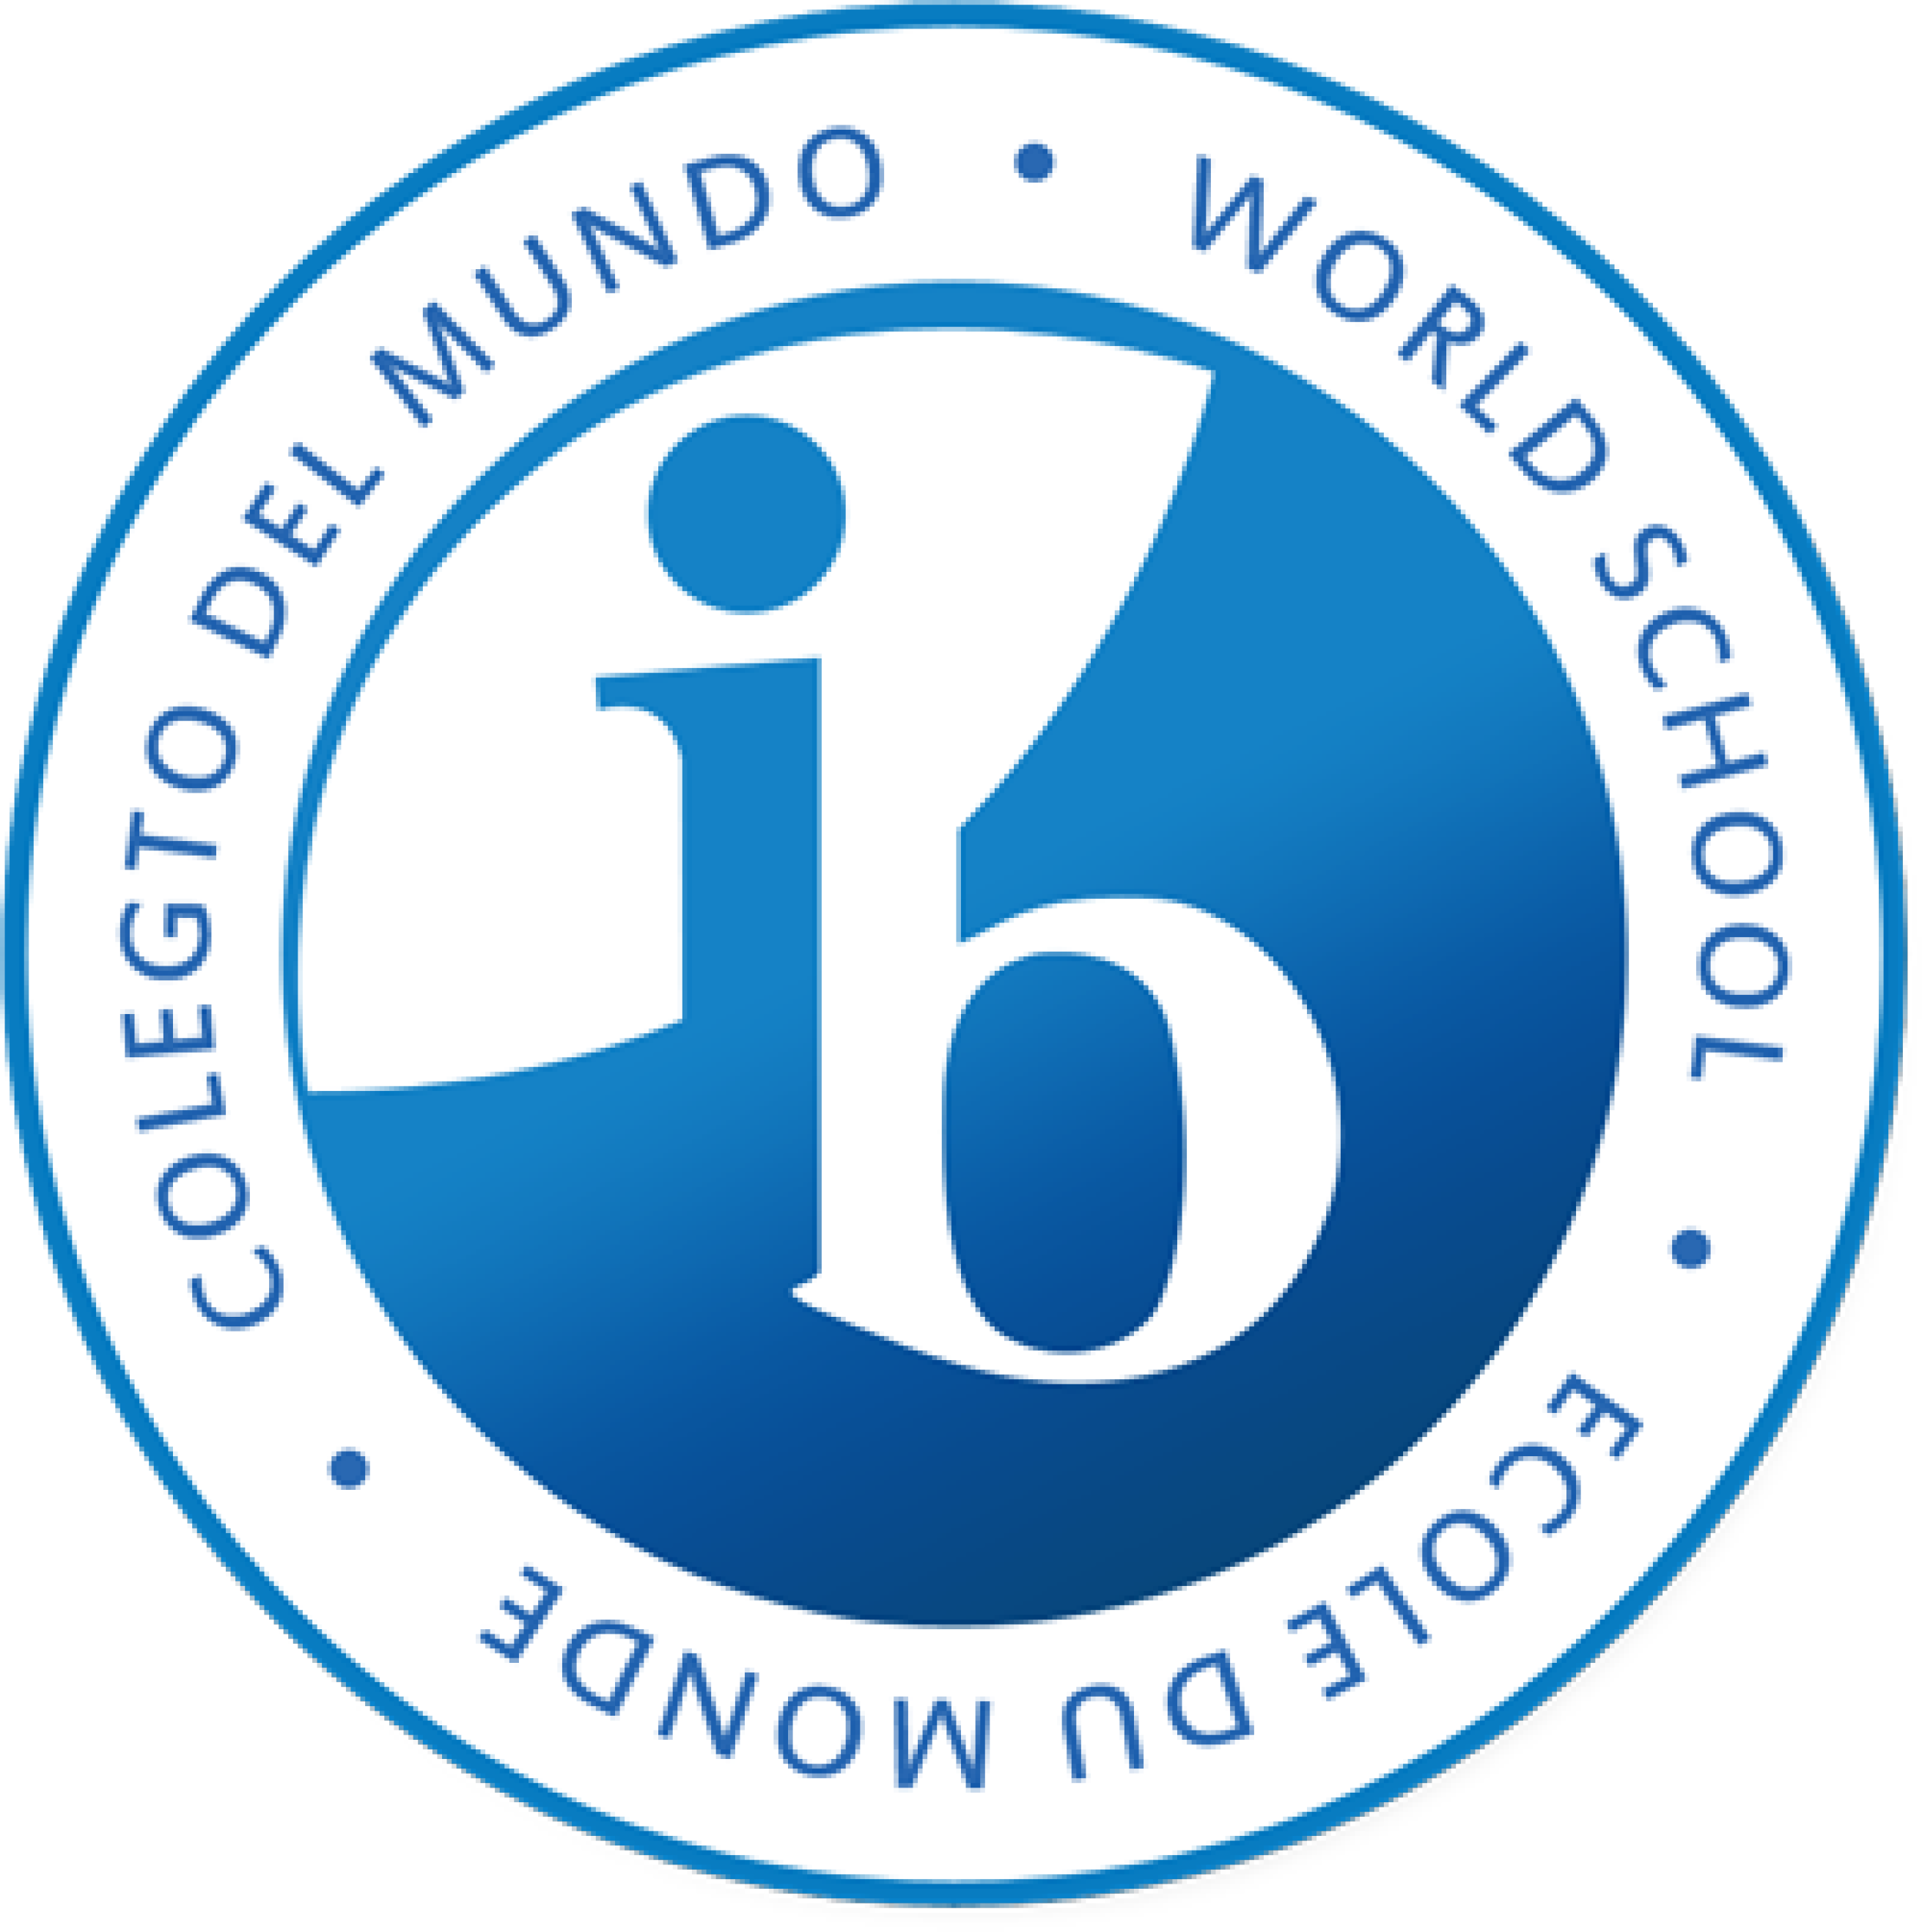 Here’s How to Choose Your IB Science Subjects